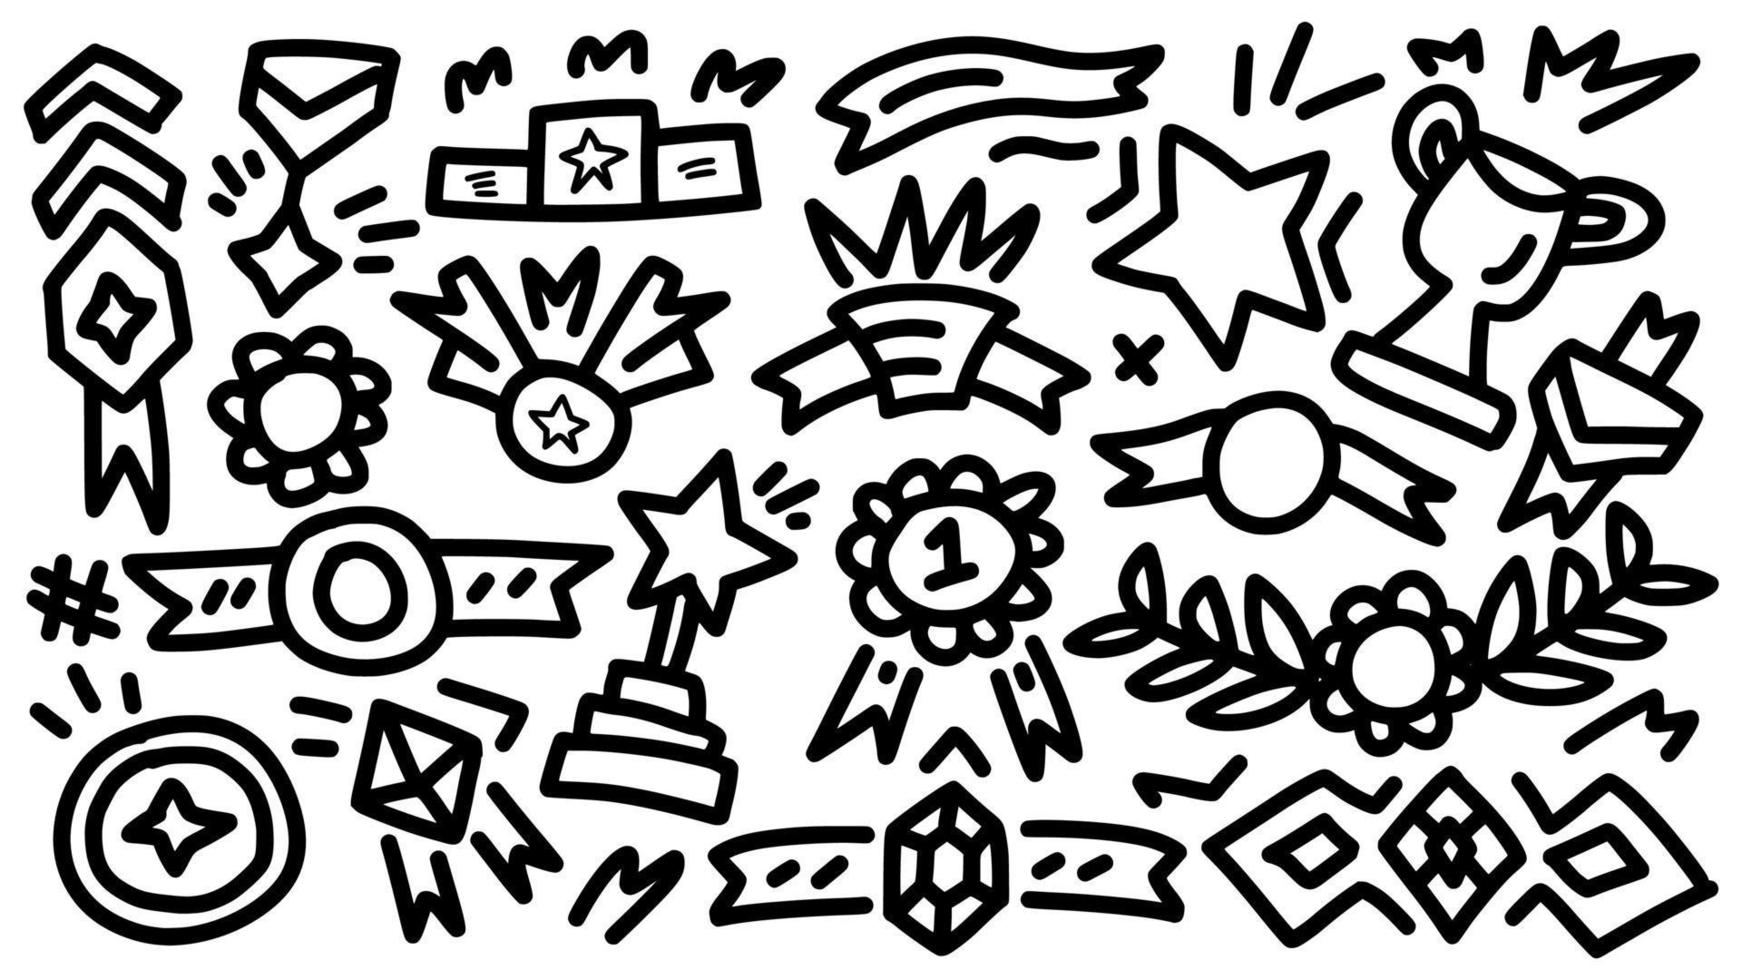 emblem and badge award or achievement icon set hand drawn doodle outline vector template illustration collection for education and coloring book